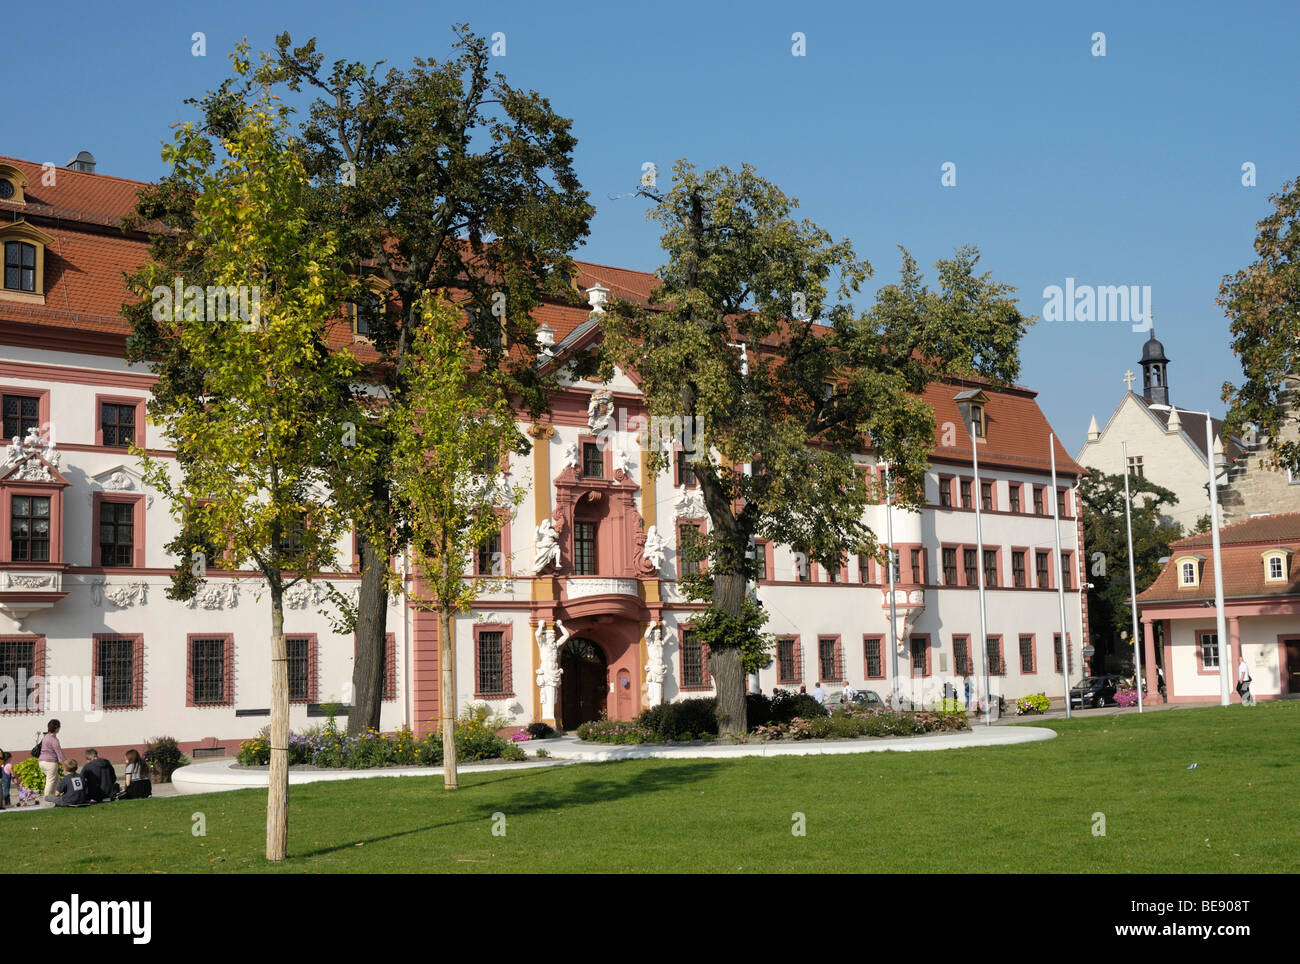 State Chancellery, Government Street, Erfurt, Thuringia, Germany, Europe Stock Photo